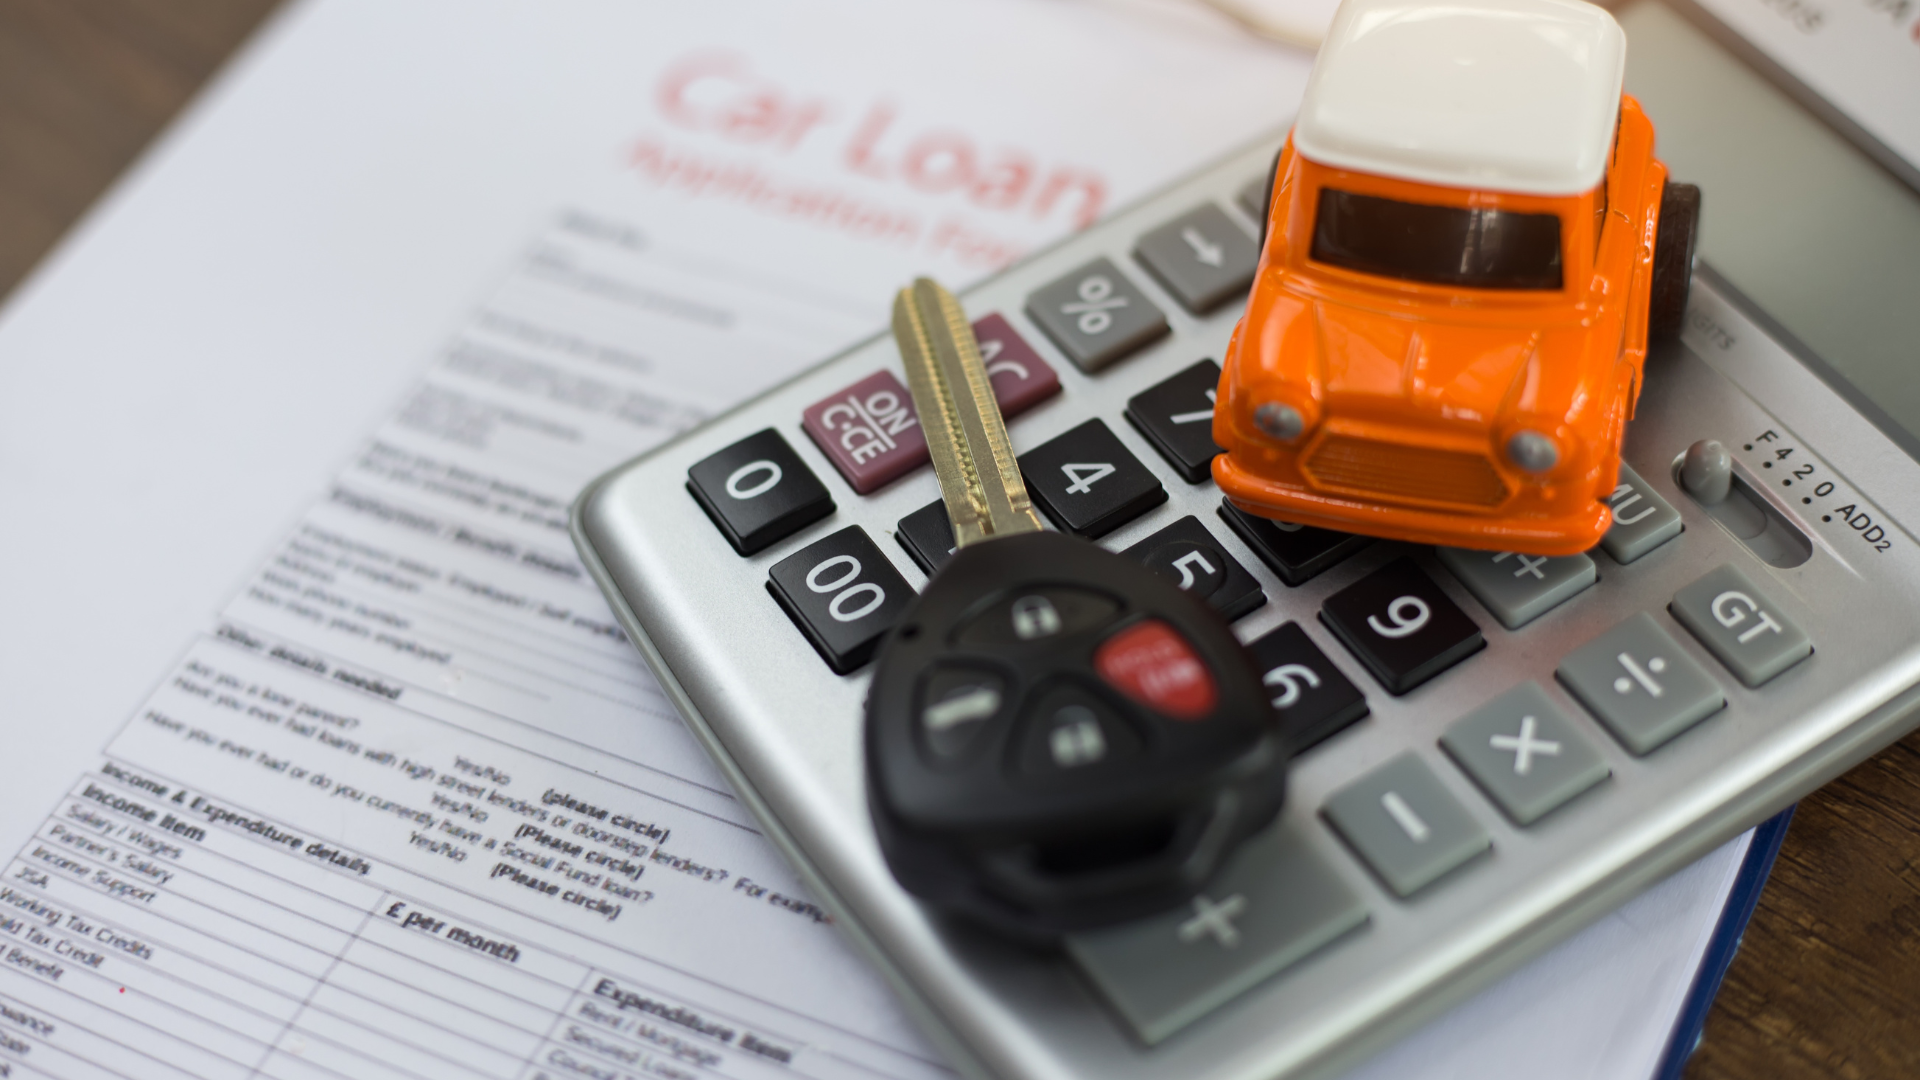 10 Tips for Pricing Your Used Car Competitively